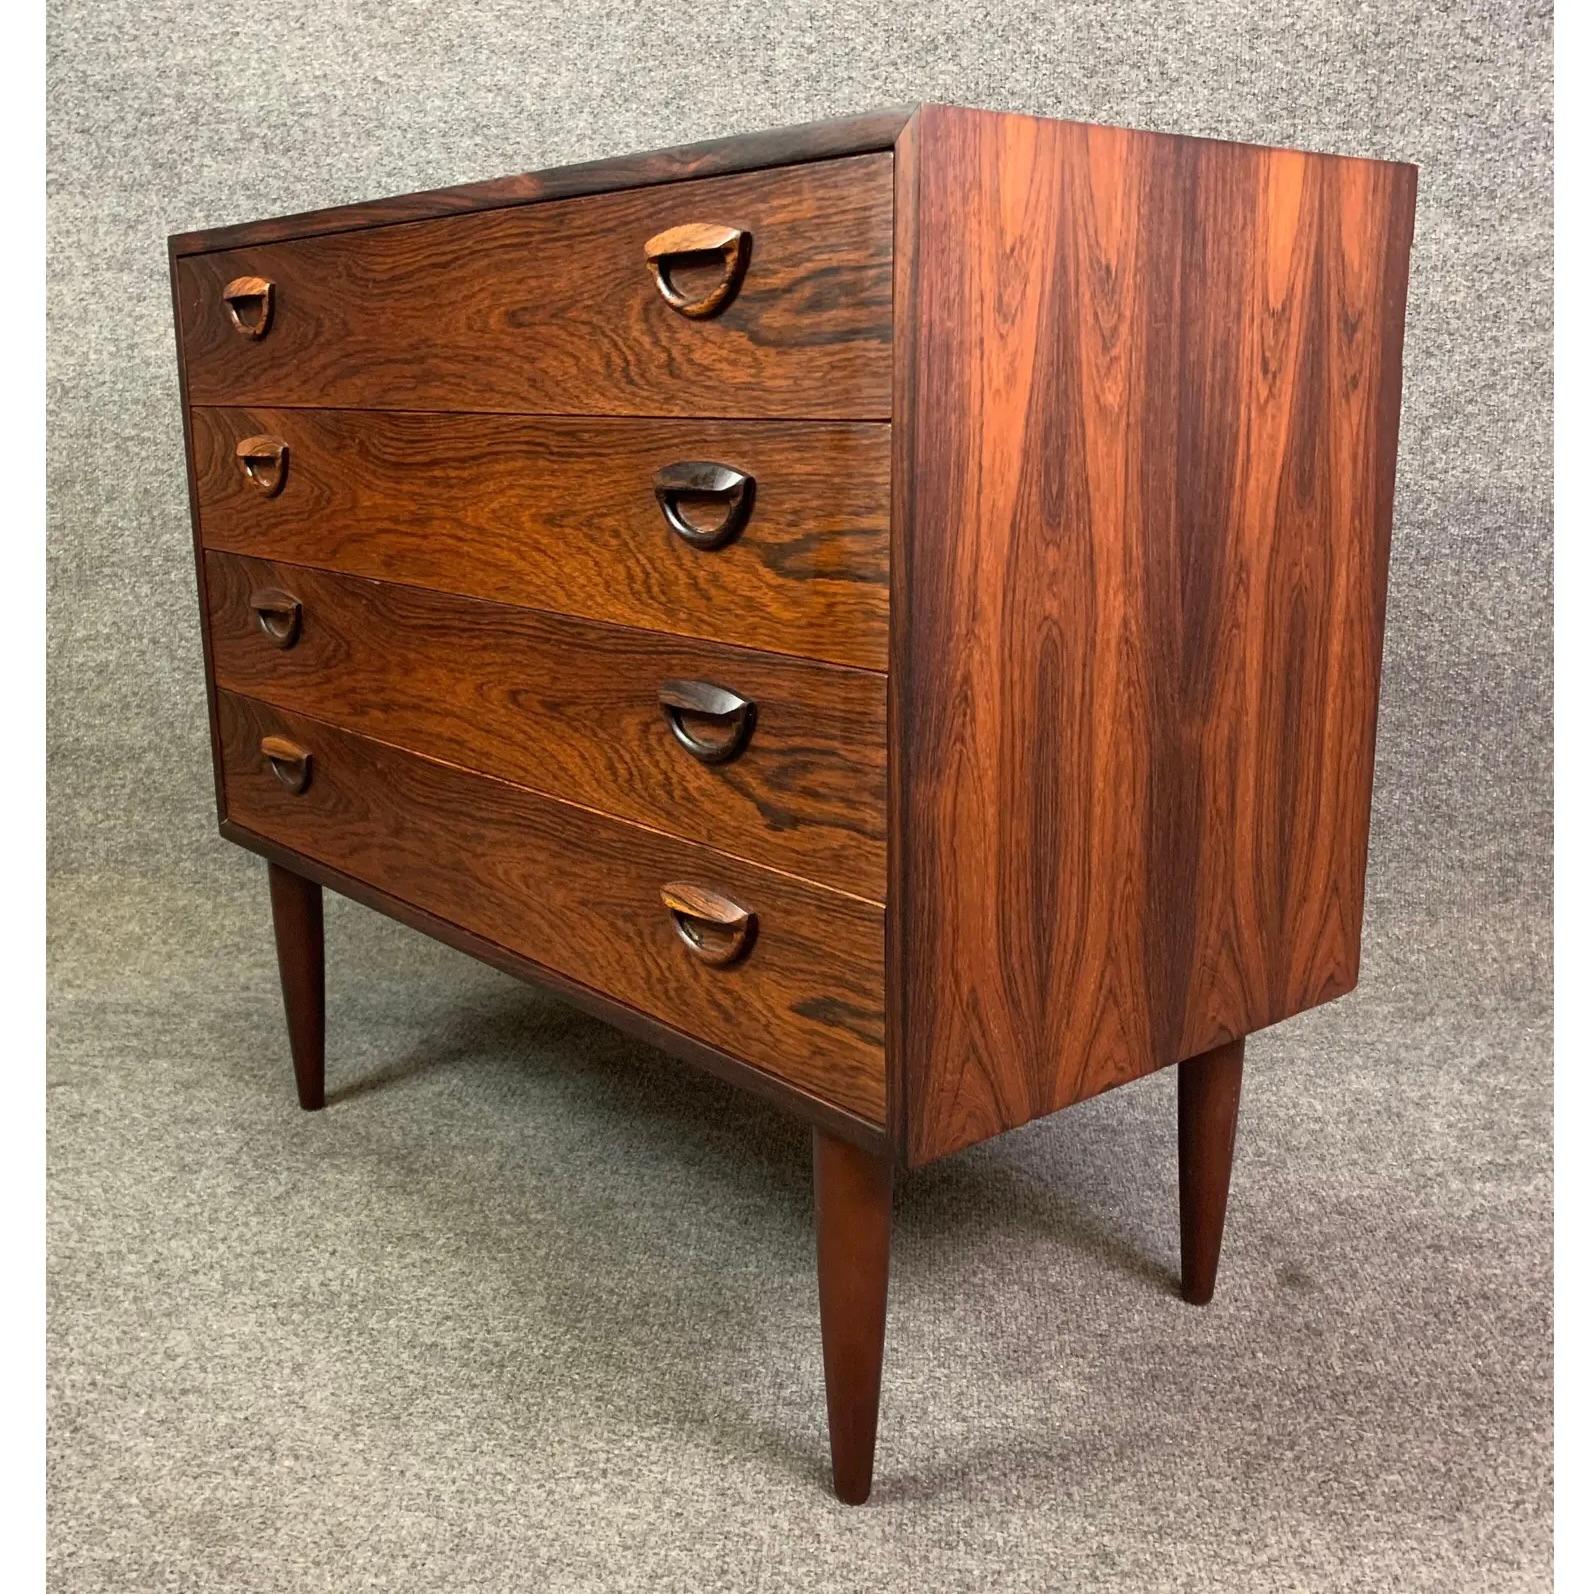 Vintage Danish Mid-Century Rosewood Chest of Drawers Dresser In Good Condition For Sale In San Marcos, CA